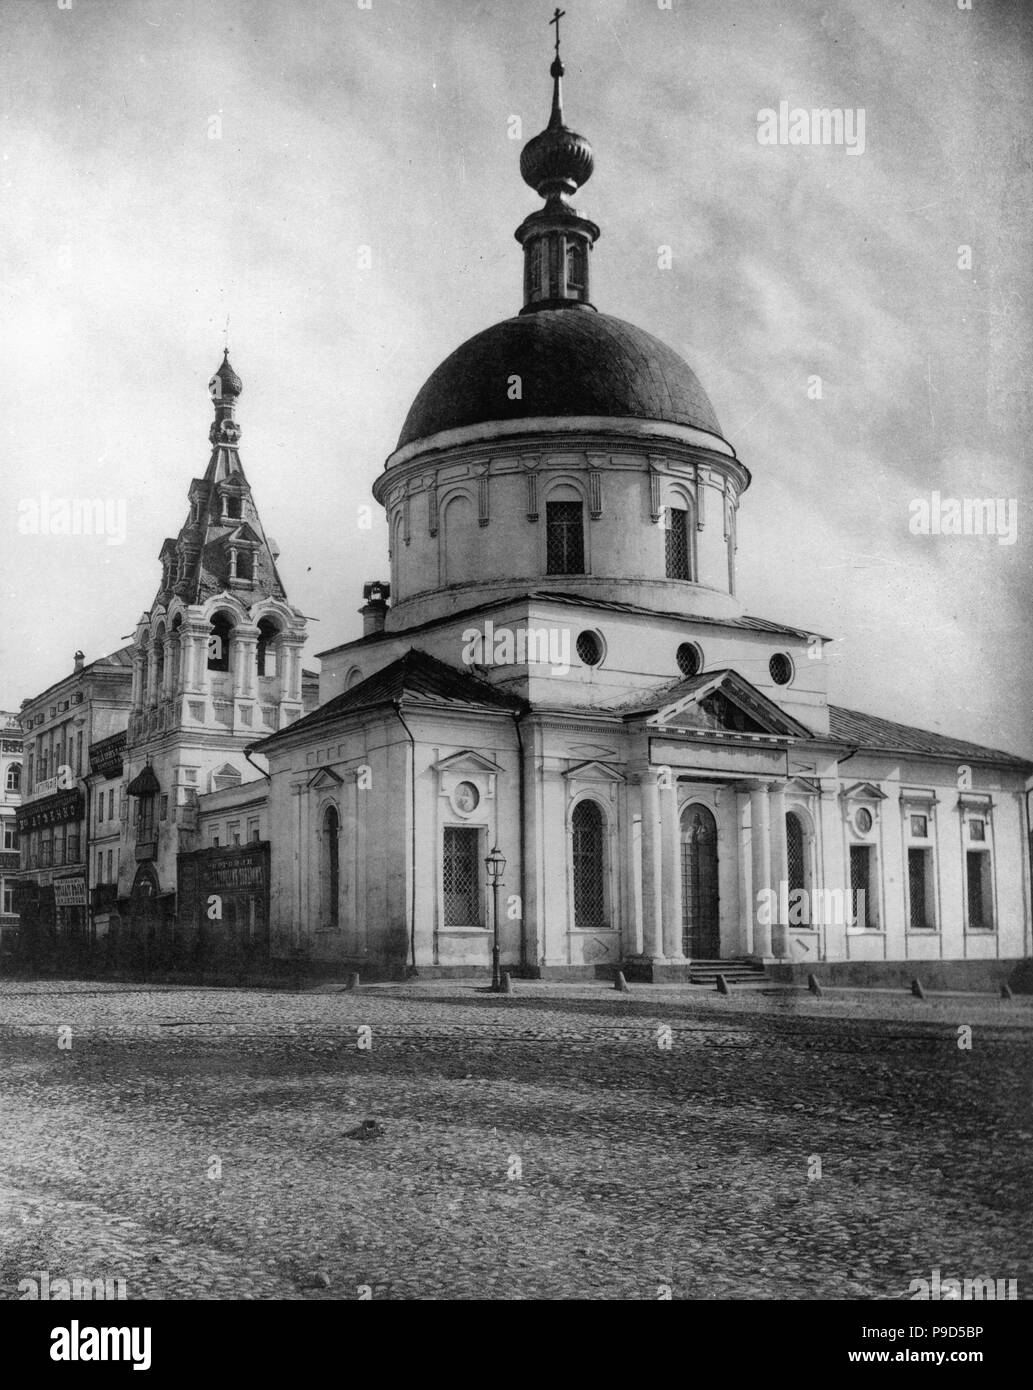 The Church of Holy Martyr Demetrius of Thessalonica on Tverskaya Gates. Museum: Russian State Film and Photo Archive, Krasnogorsk. Stock Photo